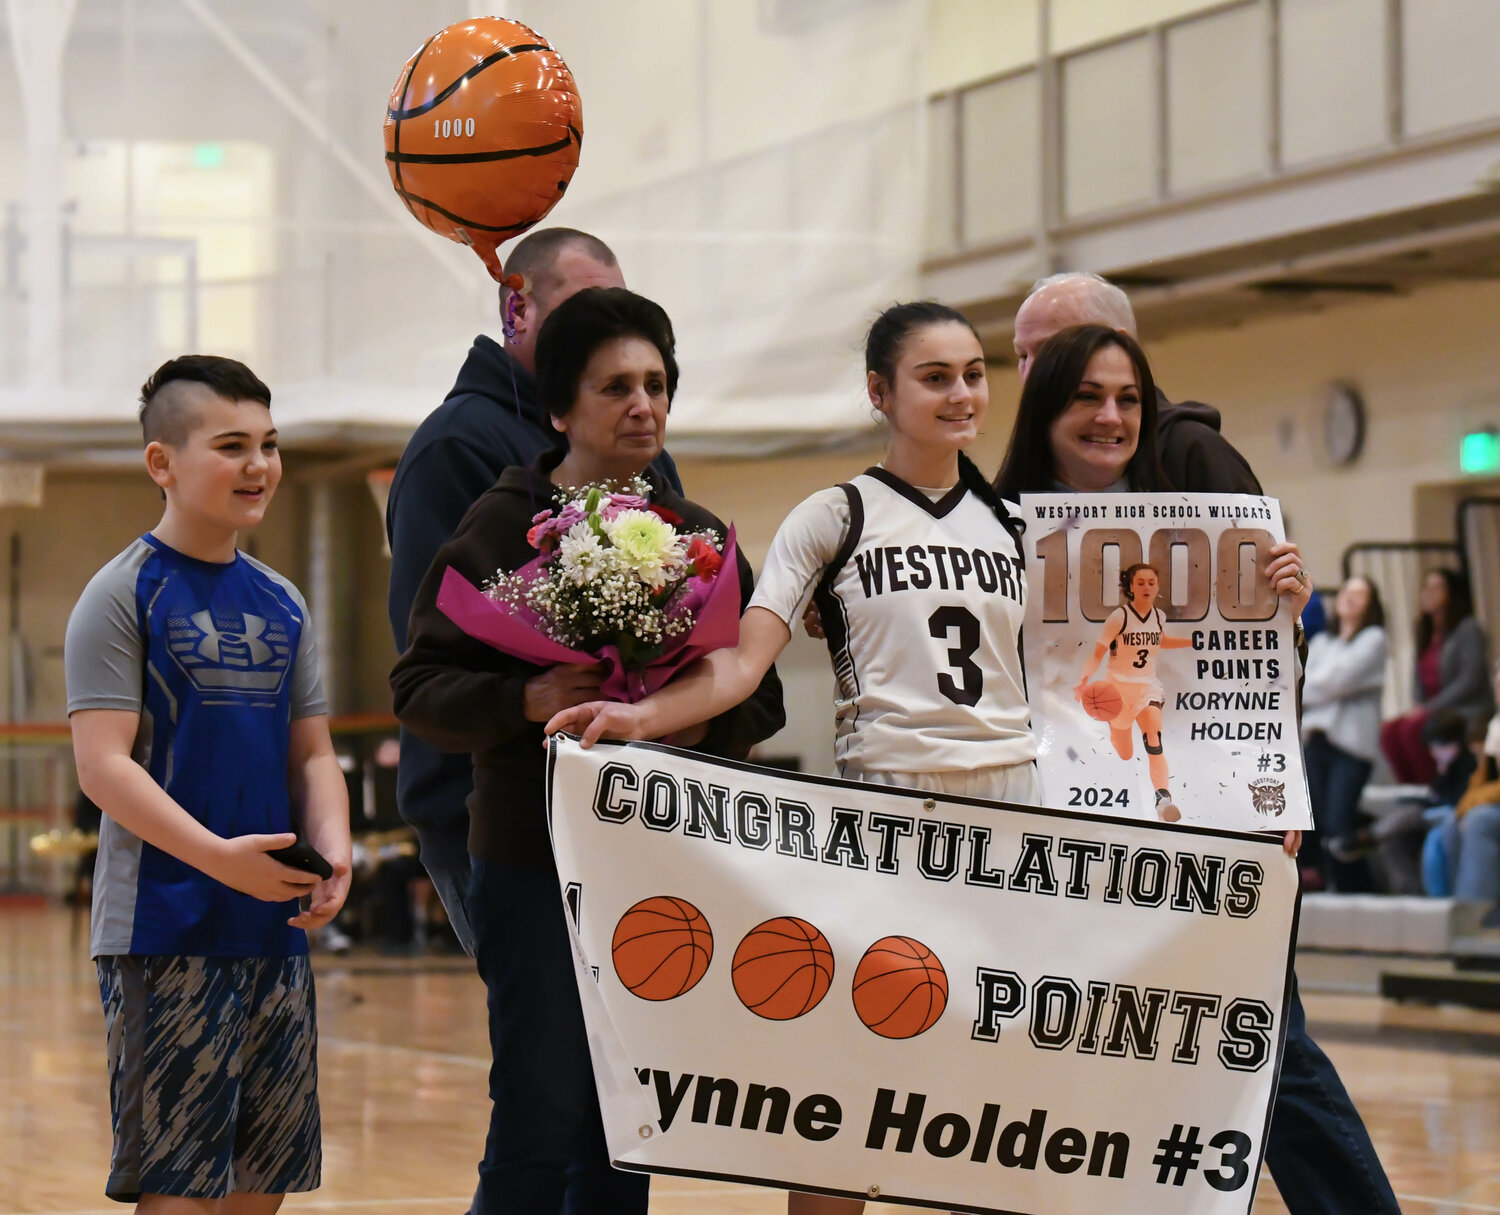 Korynne Holden celebrates with family after scoring her 1000th point on Friday night.